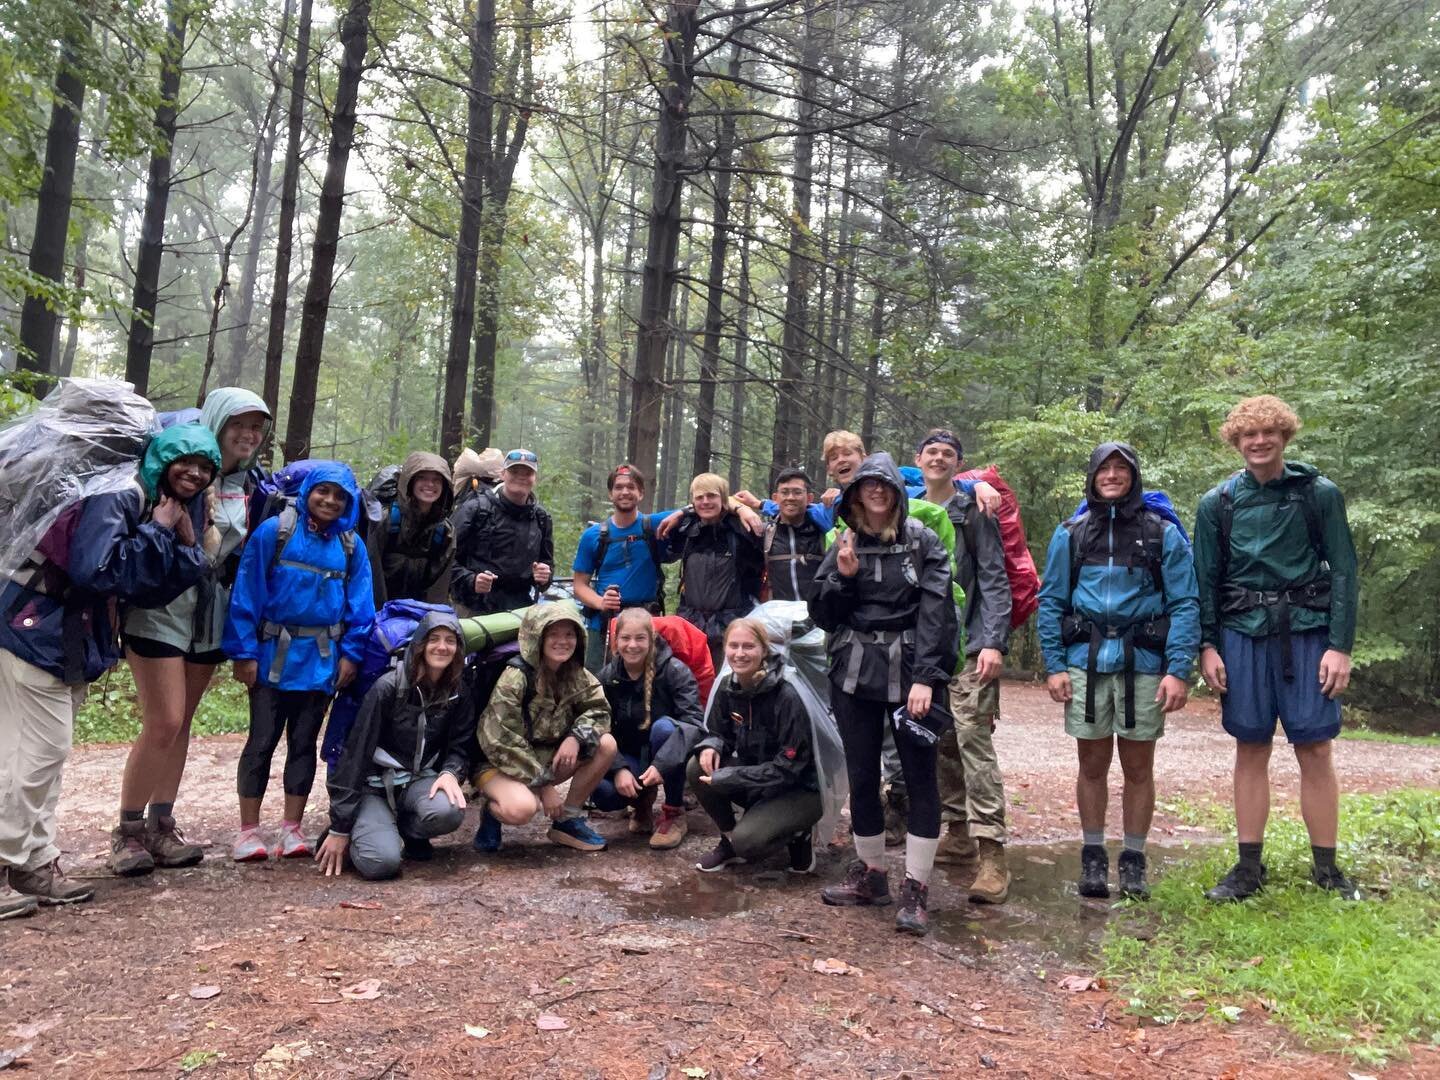 Labor Day Weekend Recap!!! Some of our members had a great time this weekend backpacking in Hoosier National Forest.

It rained the whole time but they still had type 1 fun. Impressive!